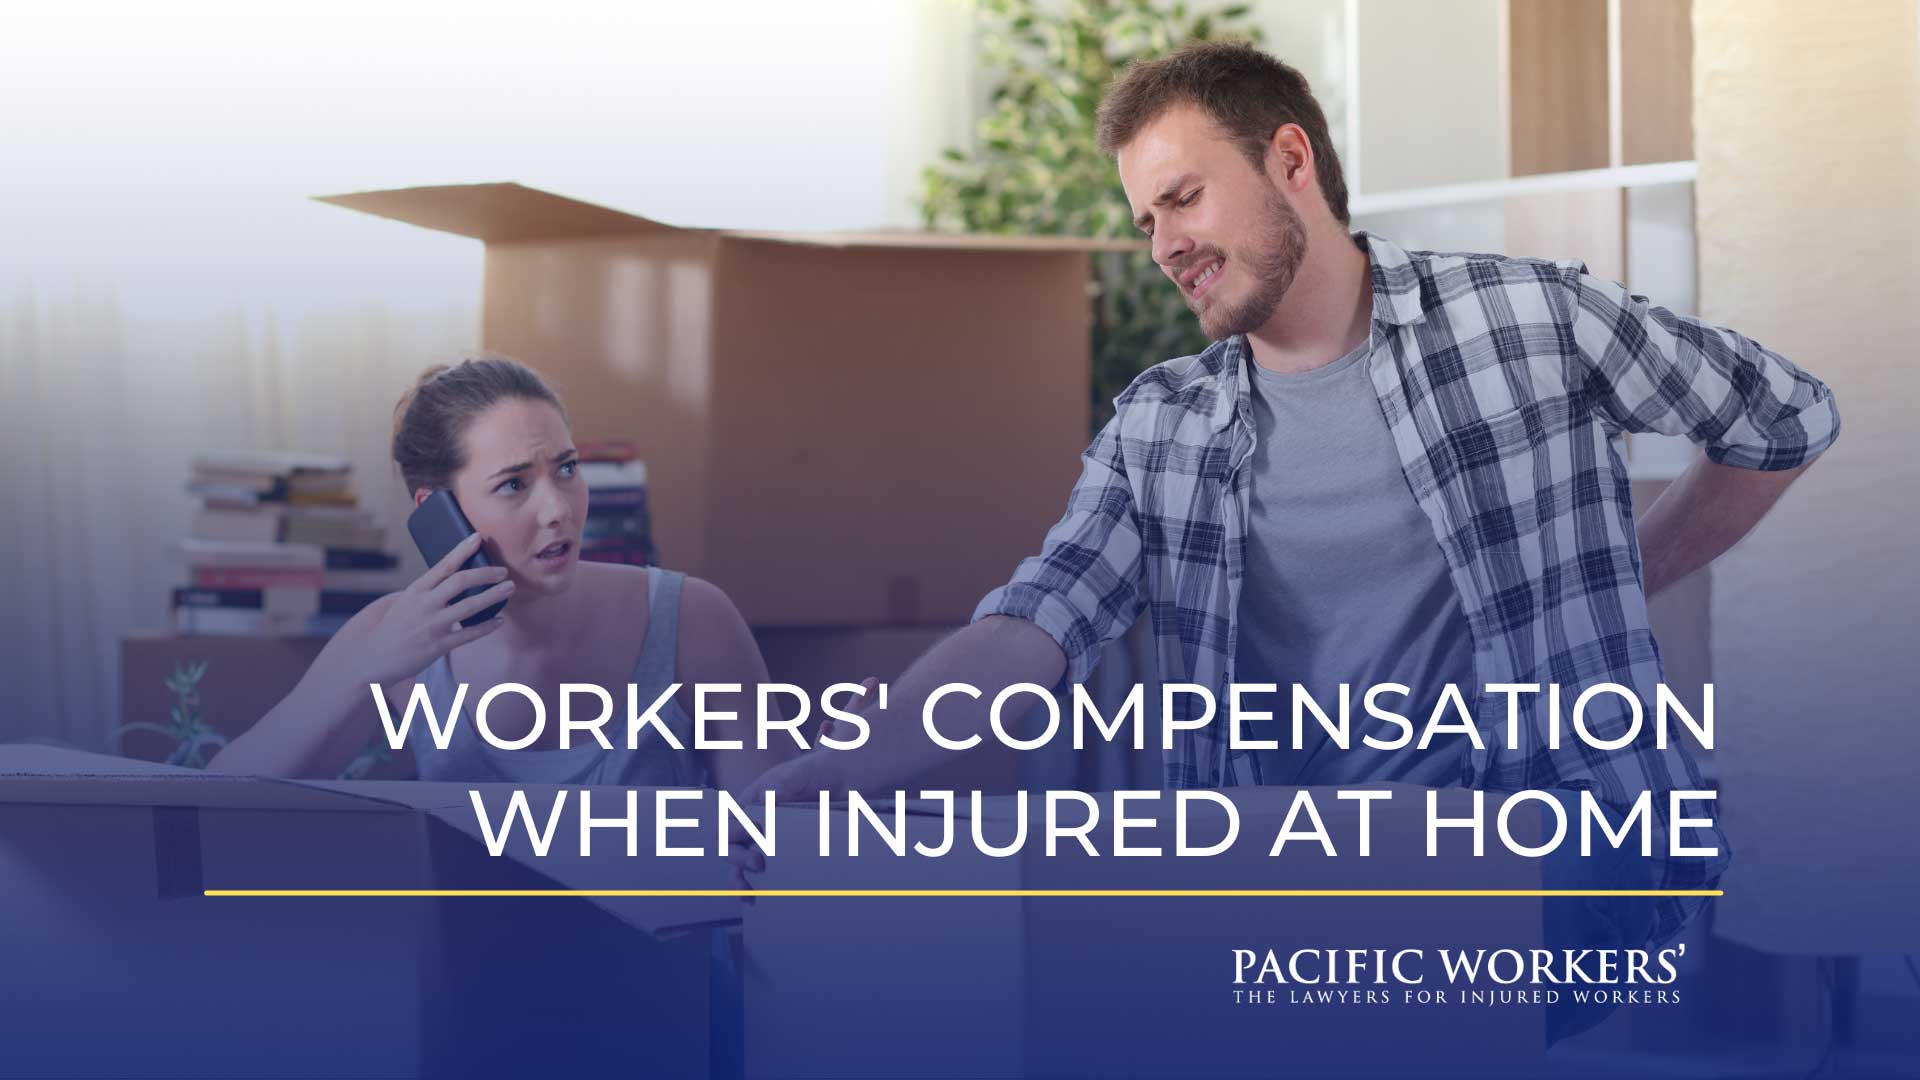 Workers’ Compensation When Injured at Home